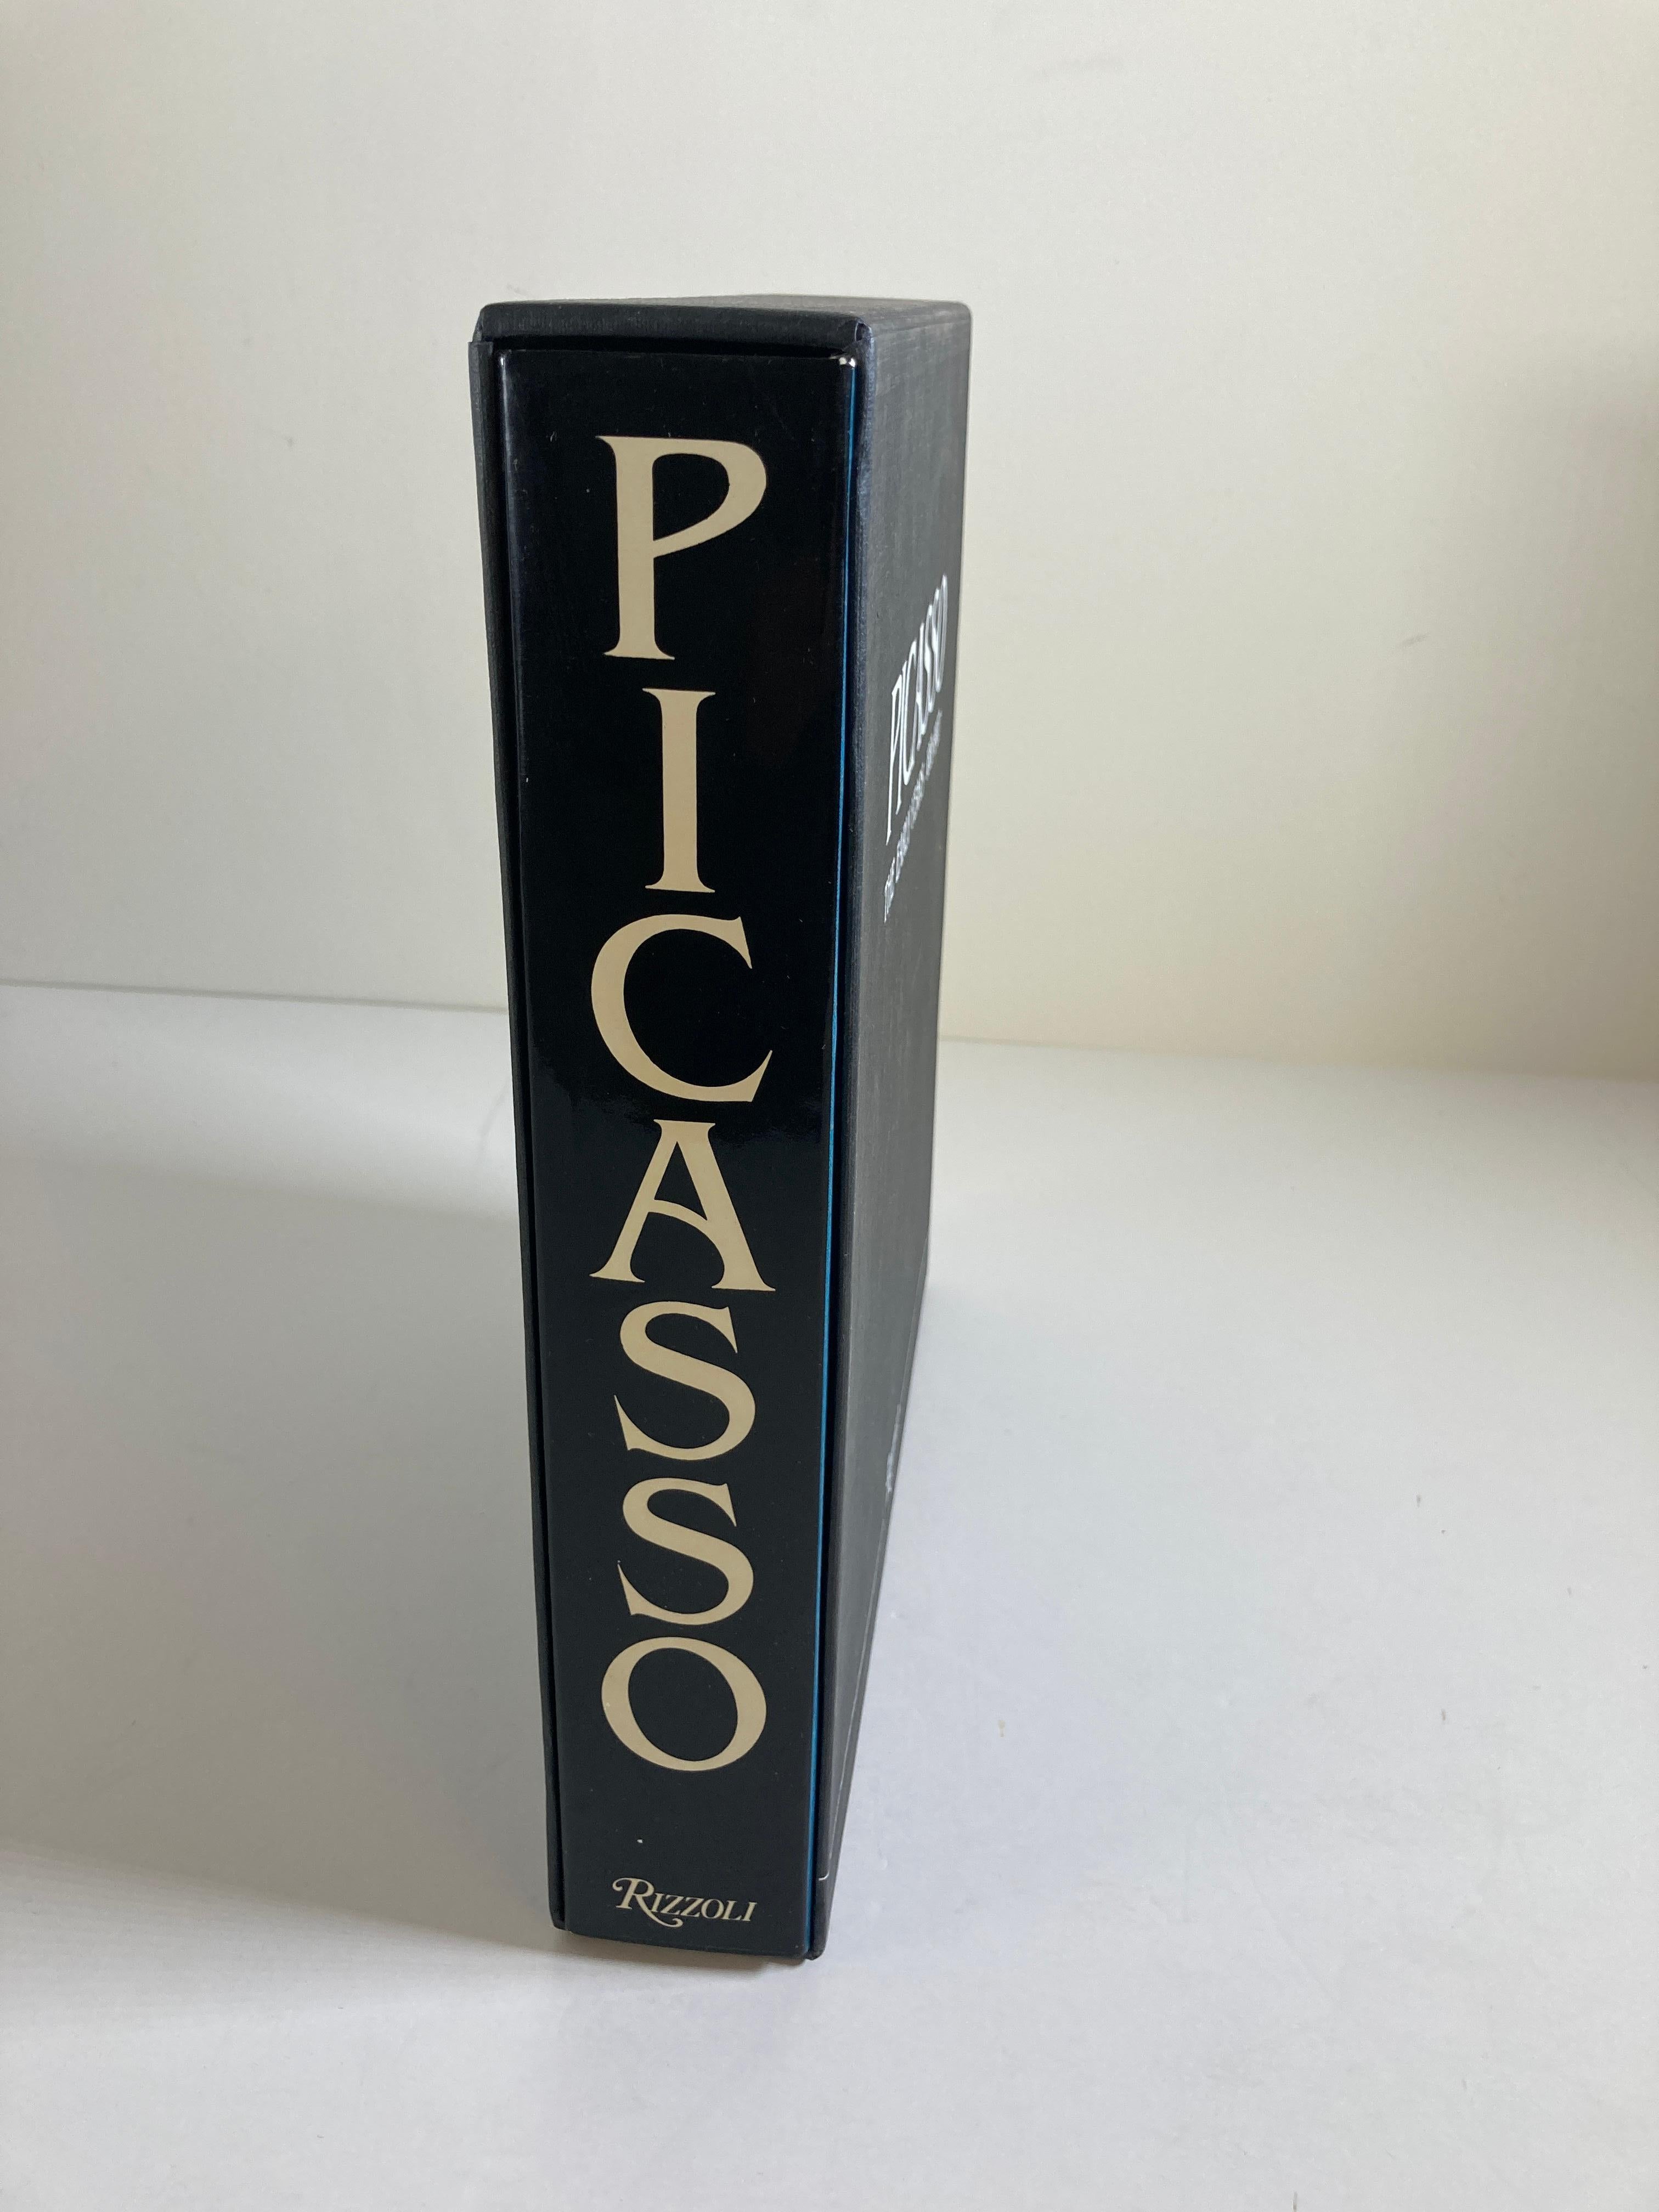 “Picasso The Early Years 1881-1907” book
By PALAU I FABRE, Josep.
New York: Rizzoli, [1981].,
1981. folio. pp.559, [1].
1587 illus. (361 in color).
First Edition of the English Translation by Kenneth Lyons.
Picasso The Early Years